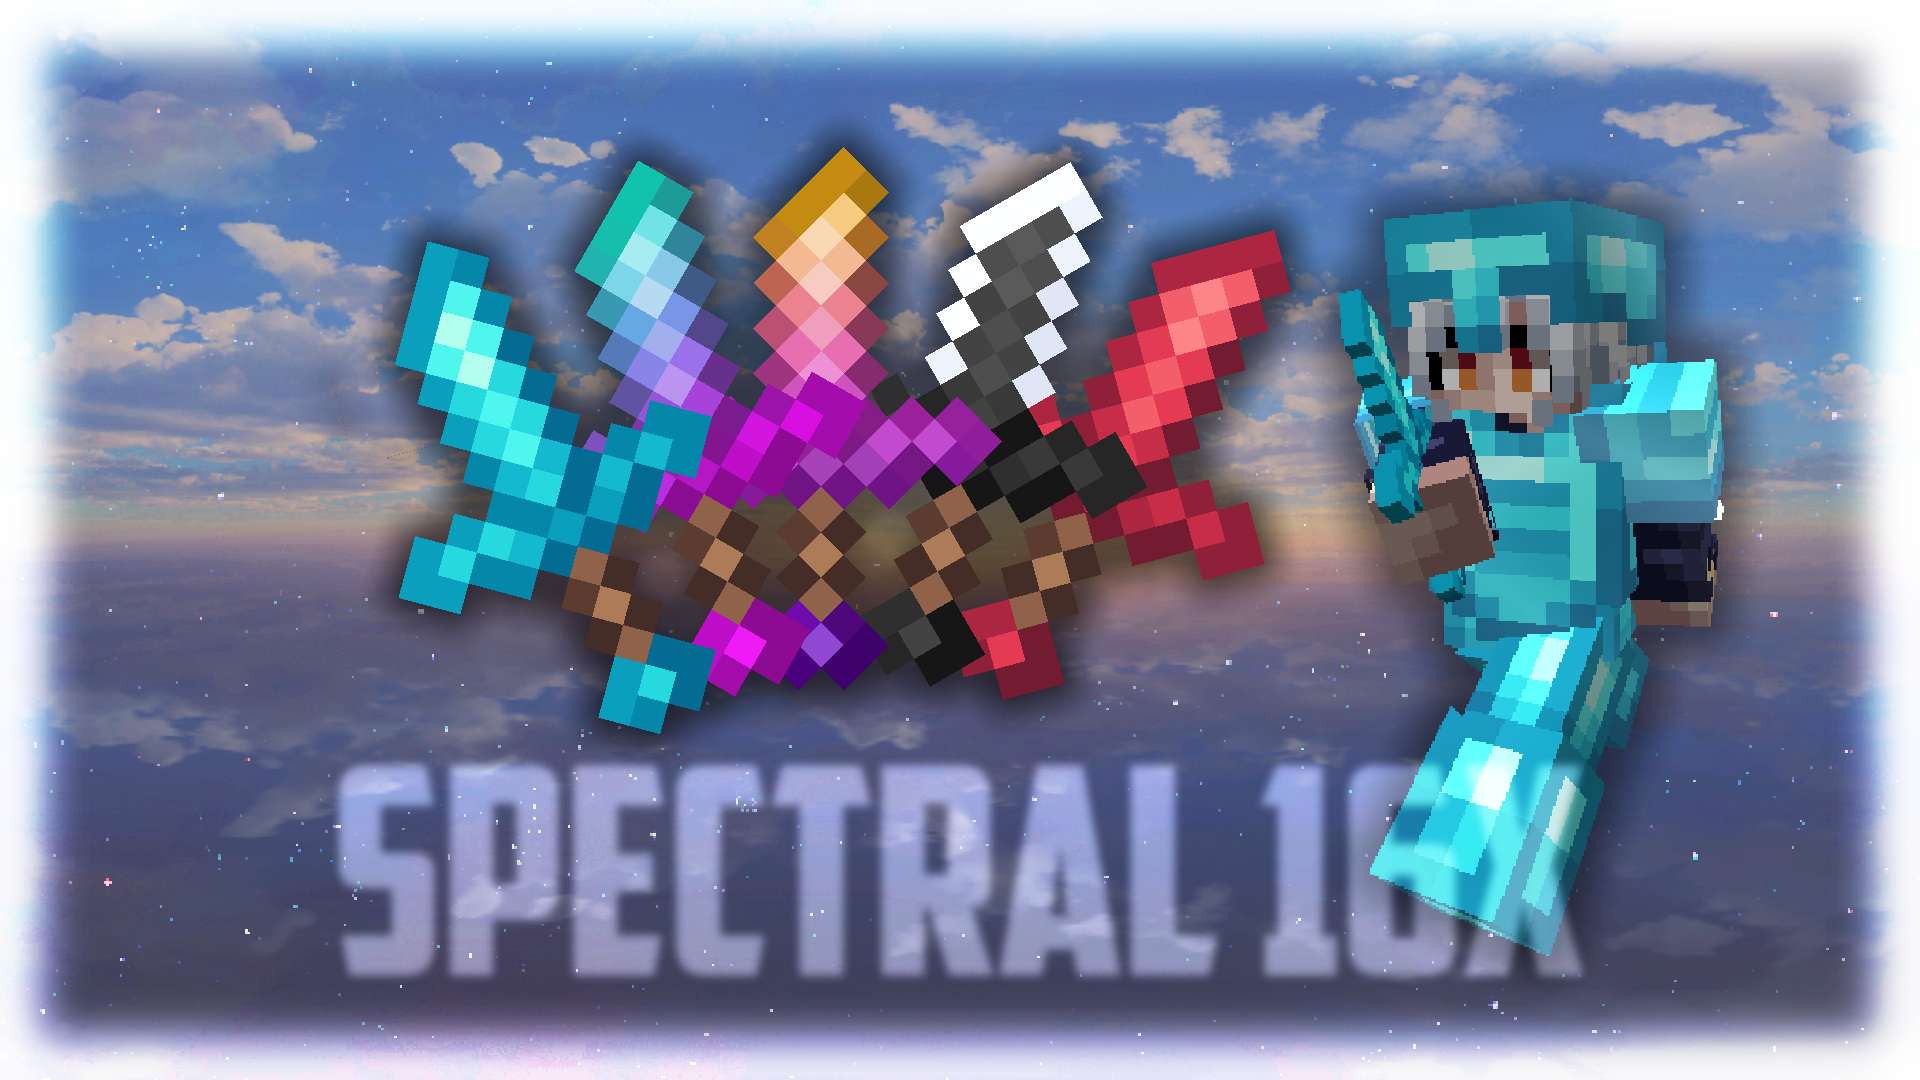 Spectral - Ice 16x by Zlax on PvPRP